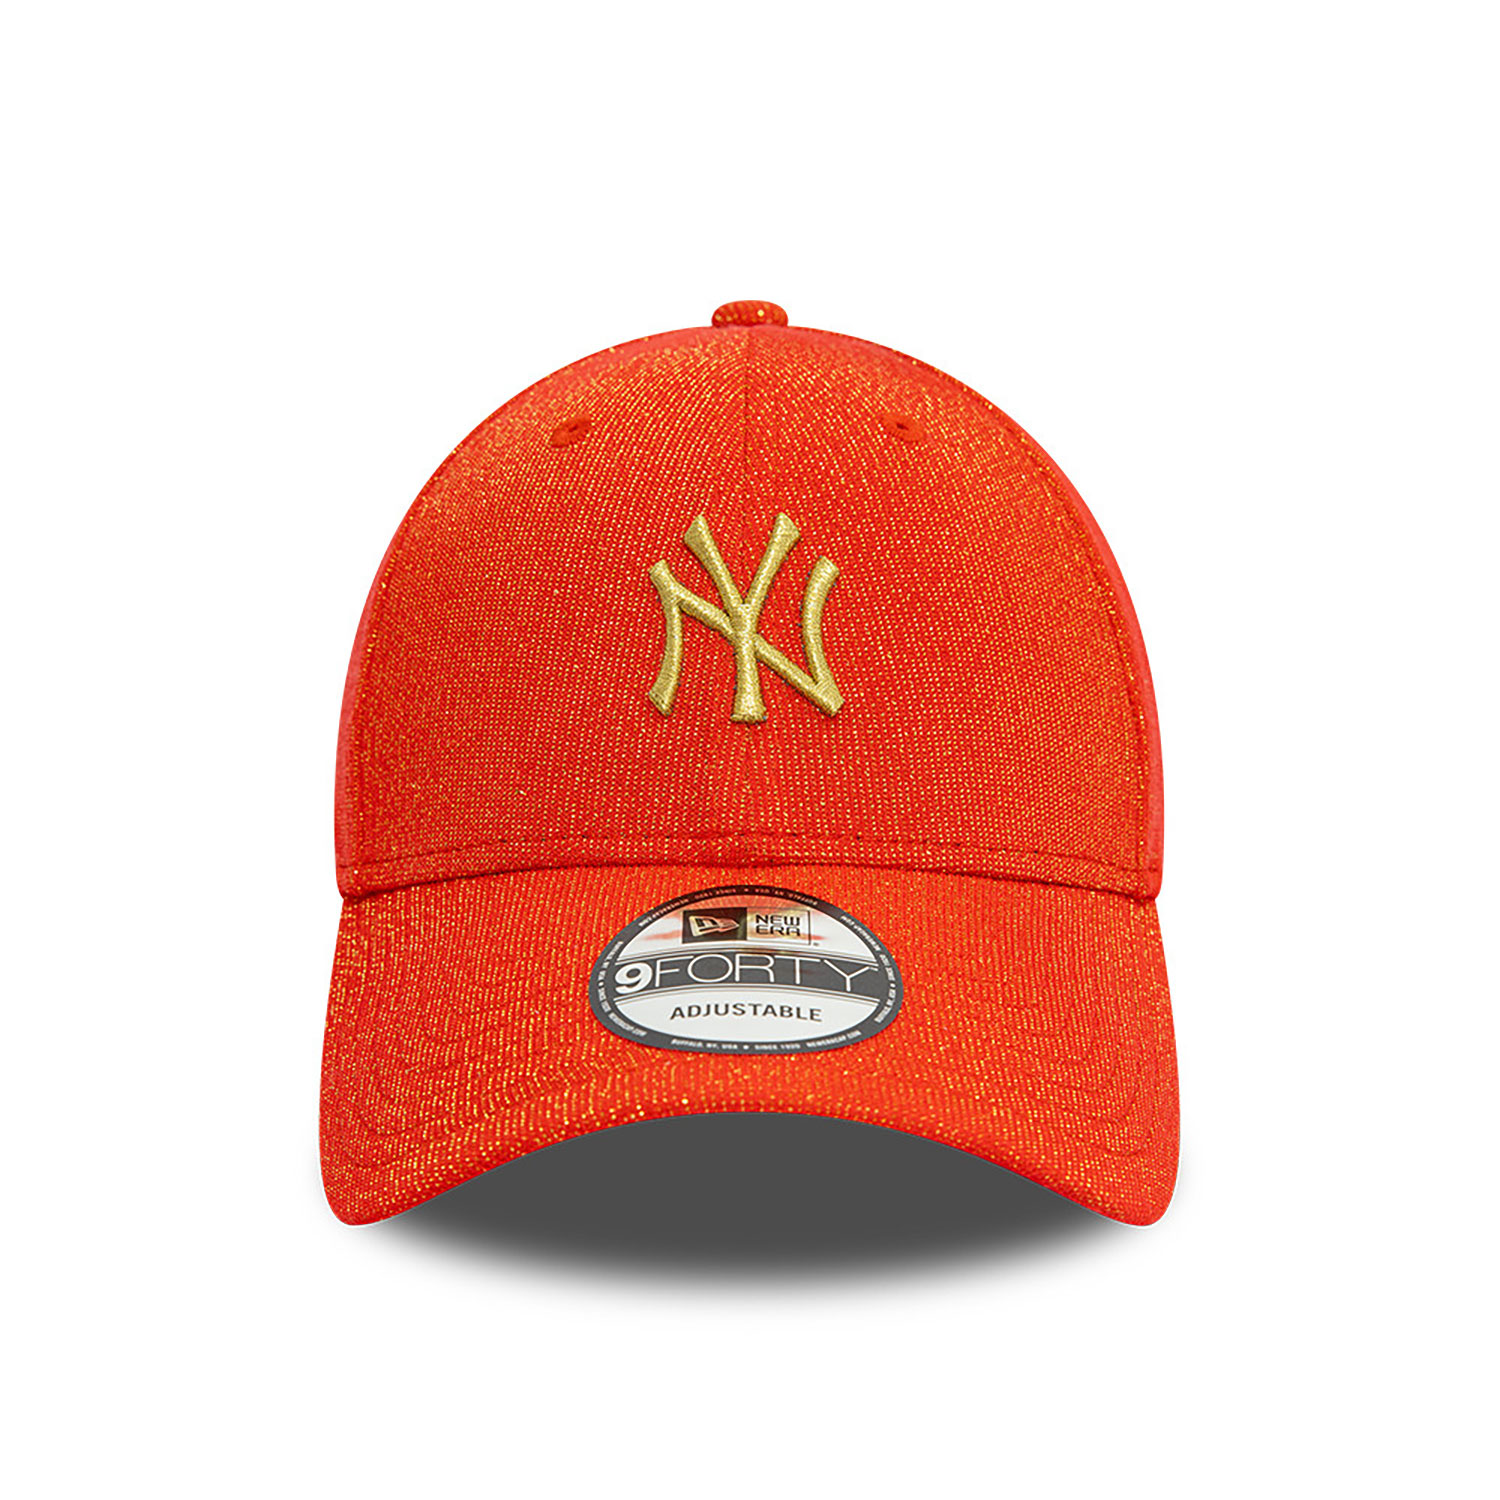 New York Yankees Sparkle Lunar New Year Red 9FORTY Adjustable Cap